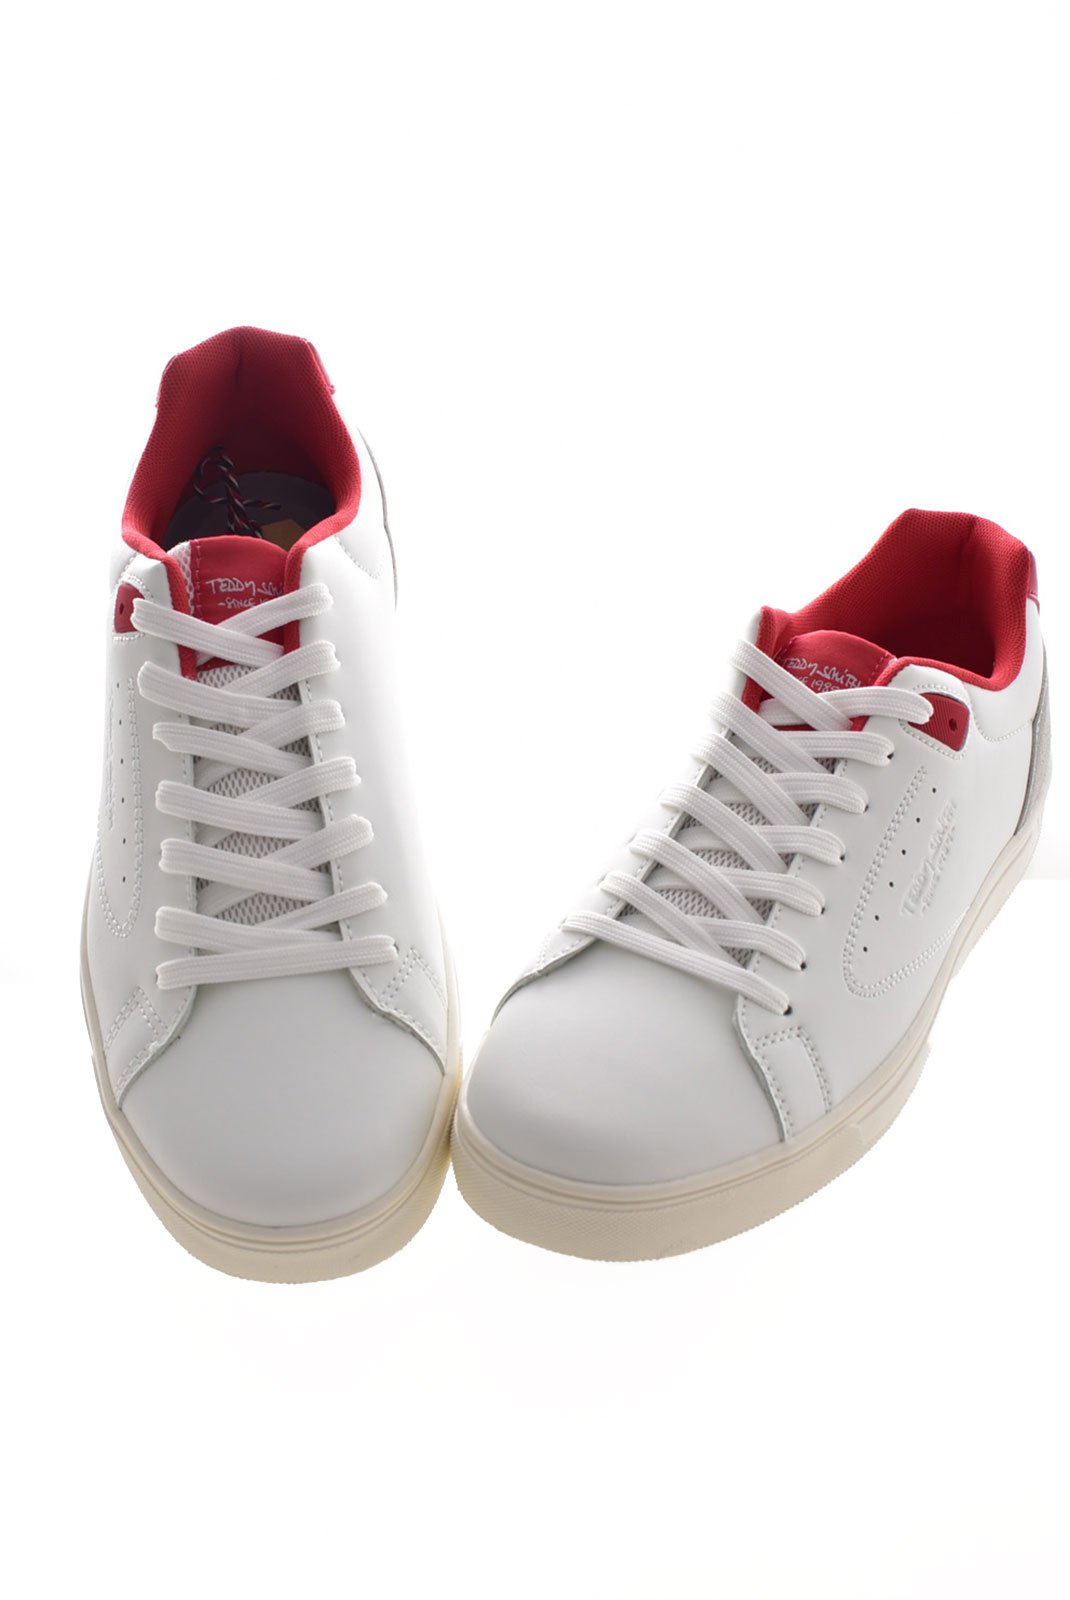 Chaussures   Teddy smith 71642 ROJO